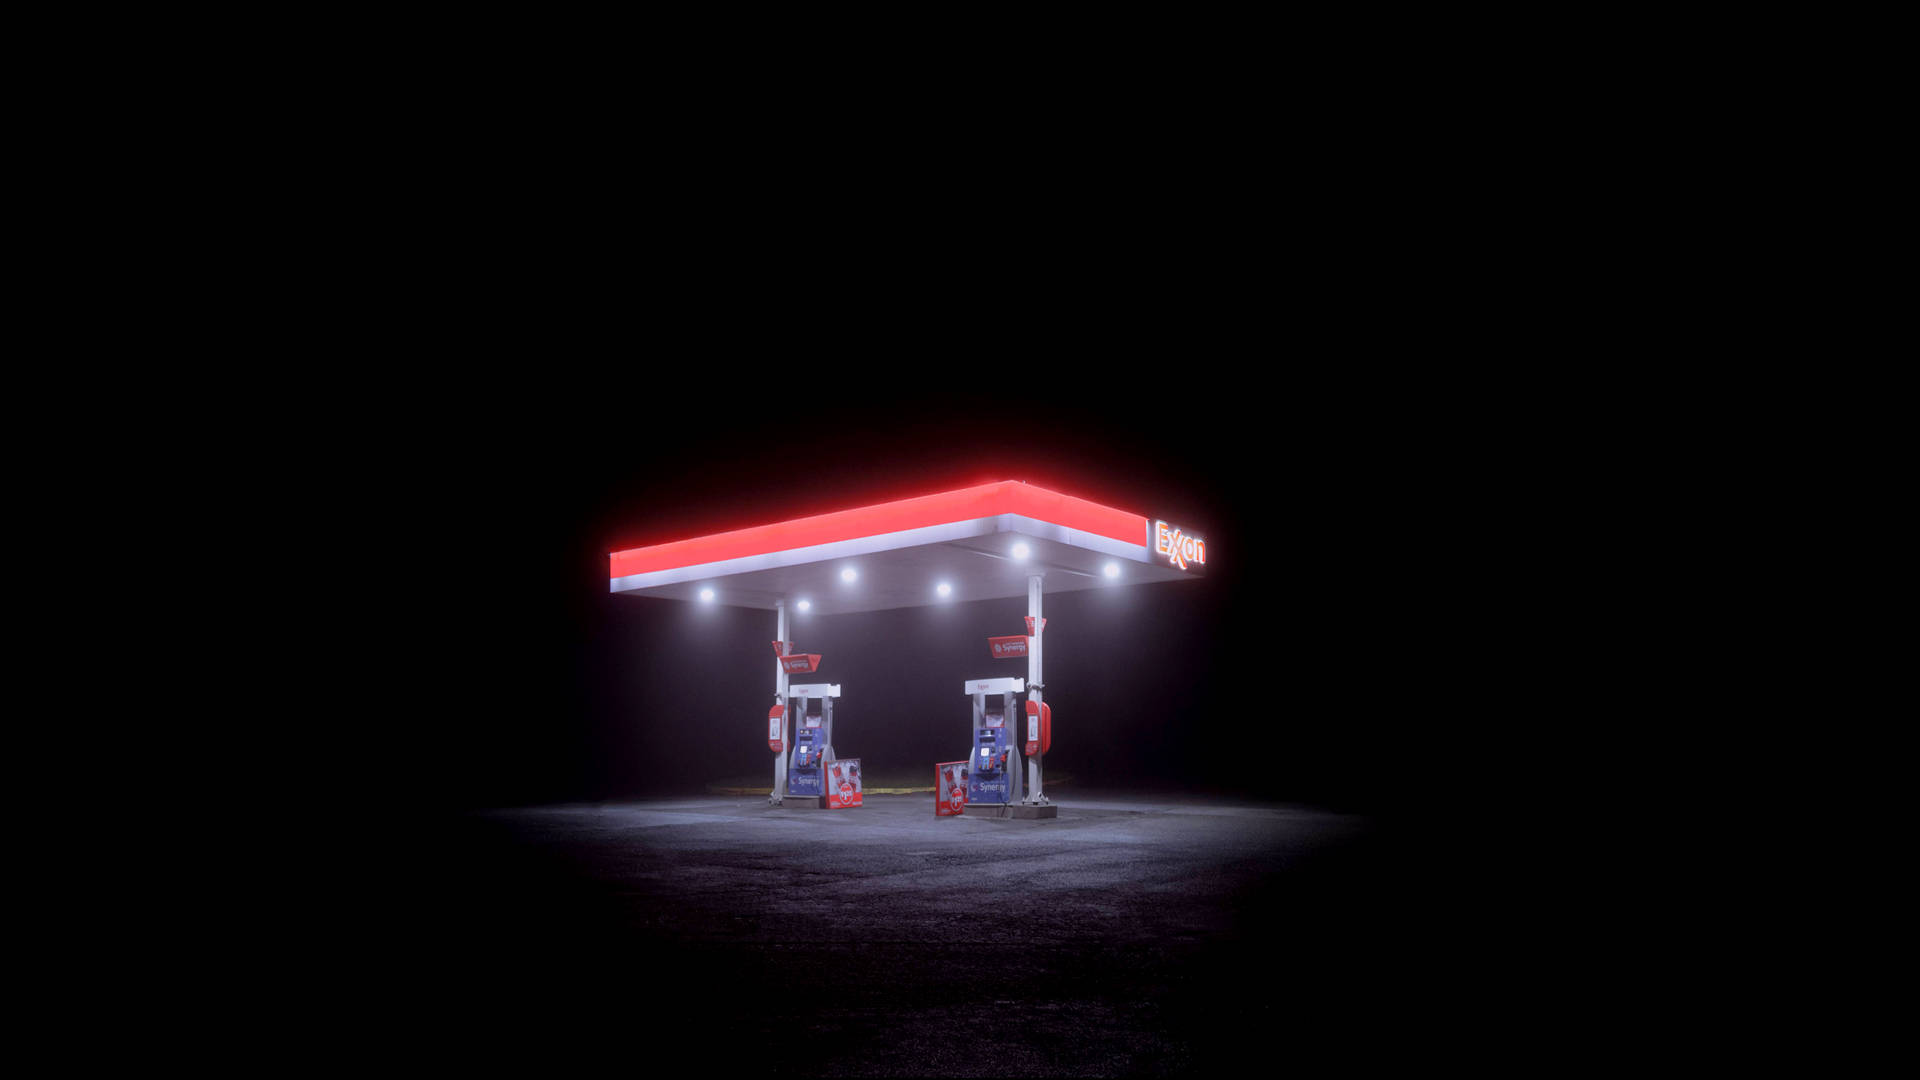 Solo Gas Station In Dark Place Background